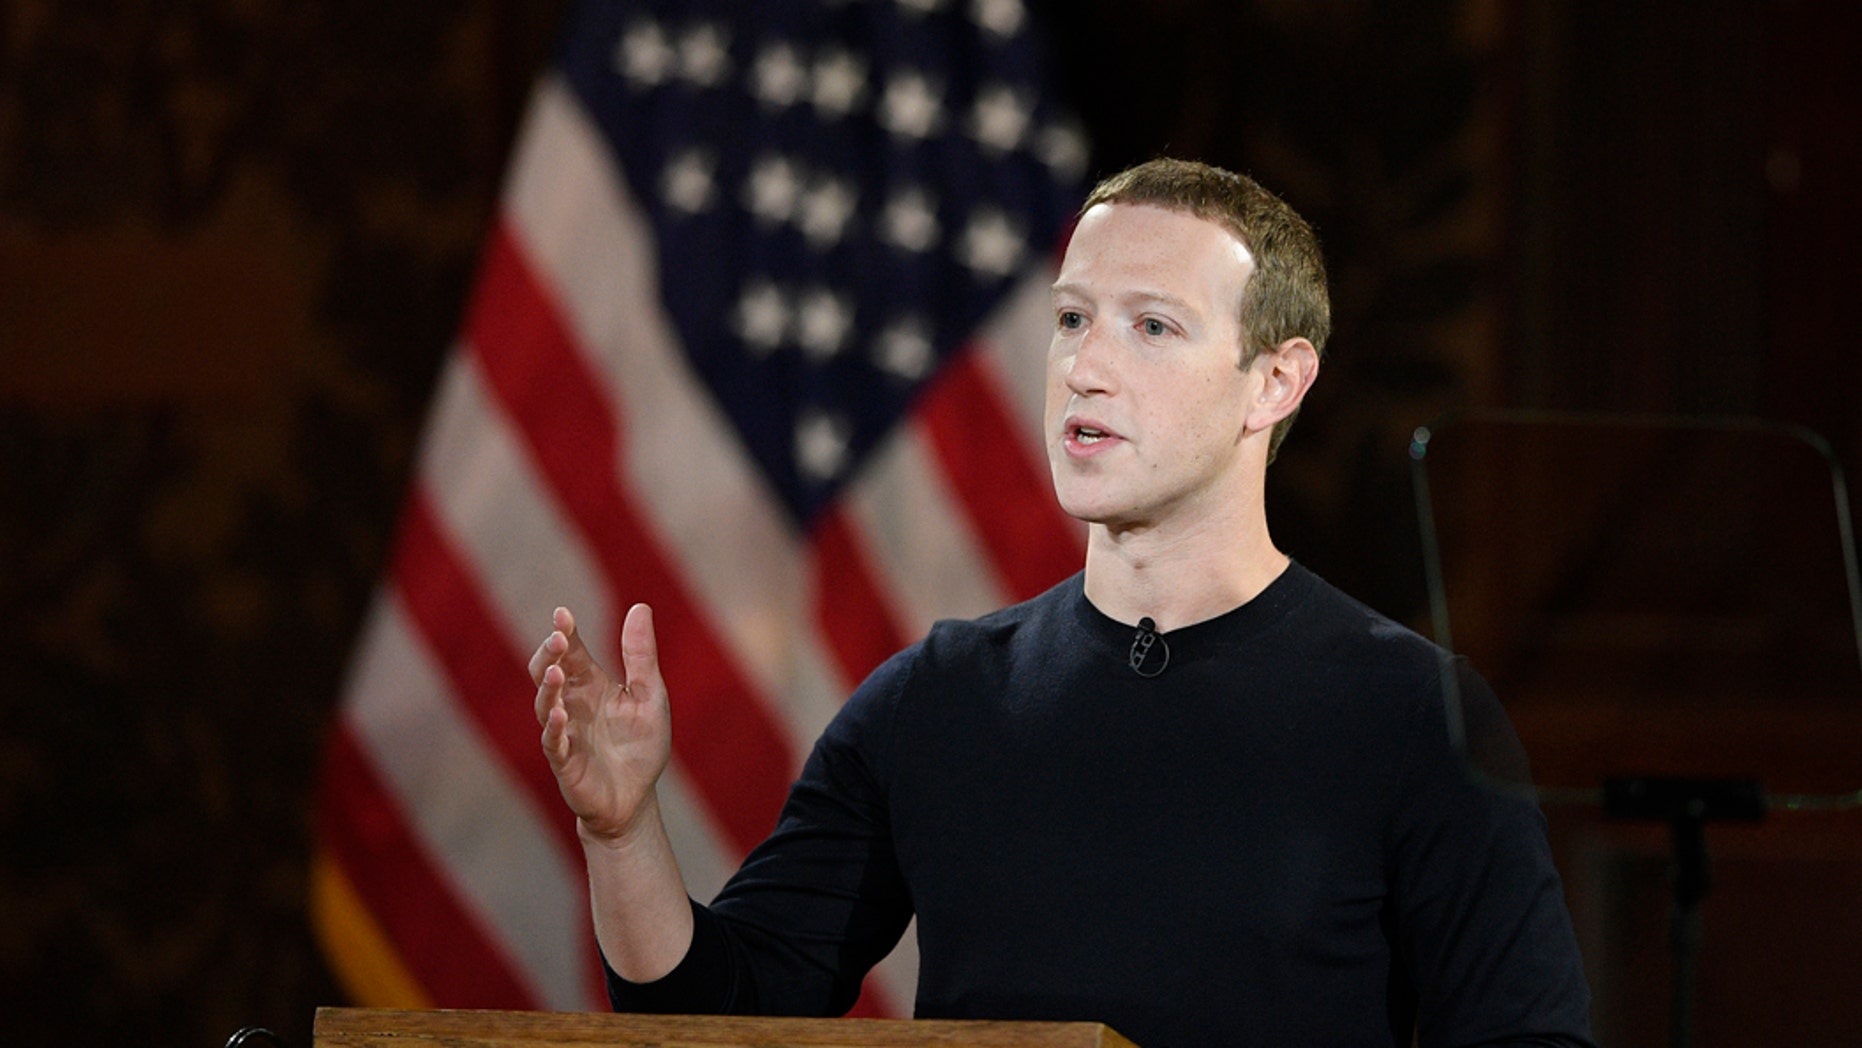 FILE - In this Oct. 17, 2019, file photo Facebook CEO Mark Zuckerberg speaks at Georgetown University in Washington. With just over a year left until the 2020 U.S. presidential election, Facebook is stepping up its efforts to ensure it is not used as a tool to interfere in politics and democracies around the world. Facebook said Monday, Oct. 21, that it will also label state-controlled media as such, label fact -checks more clearly and invest $2 million in media literacy projects. (AP Photo/Nick Wass, File)